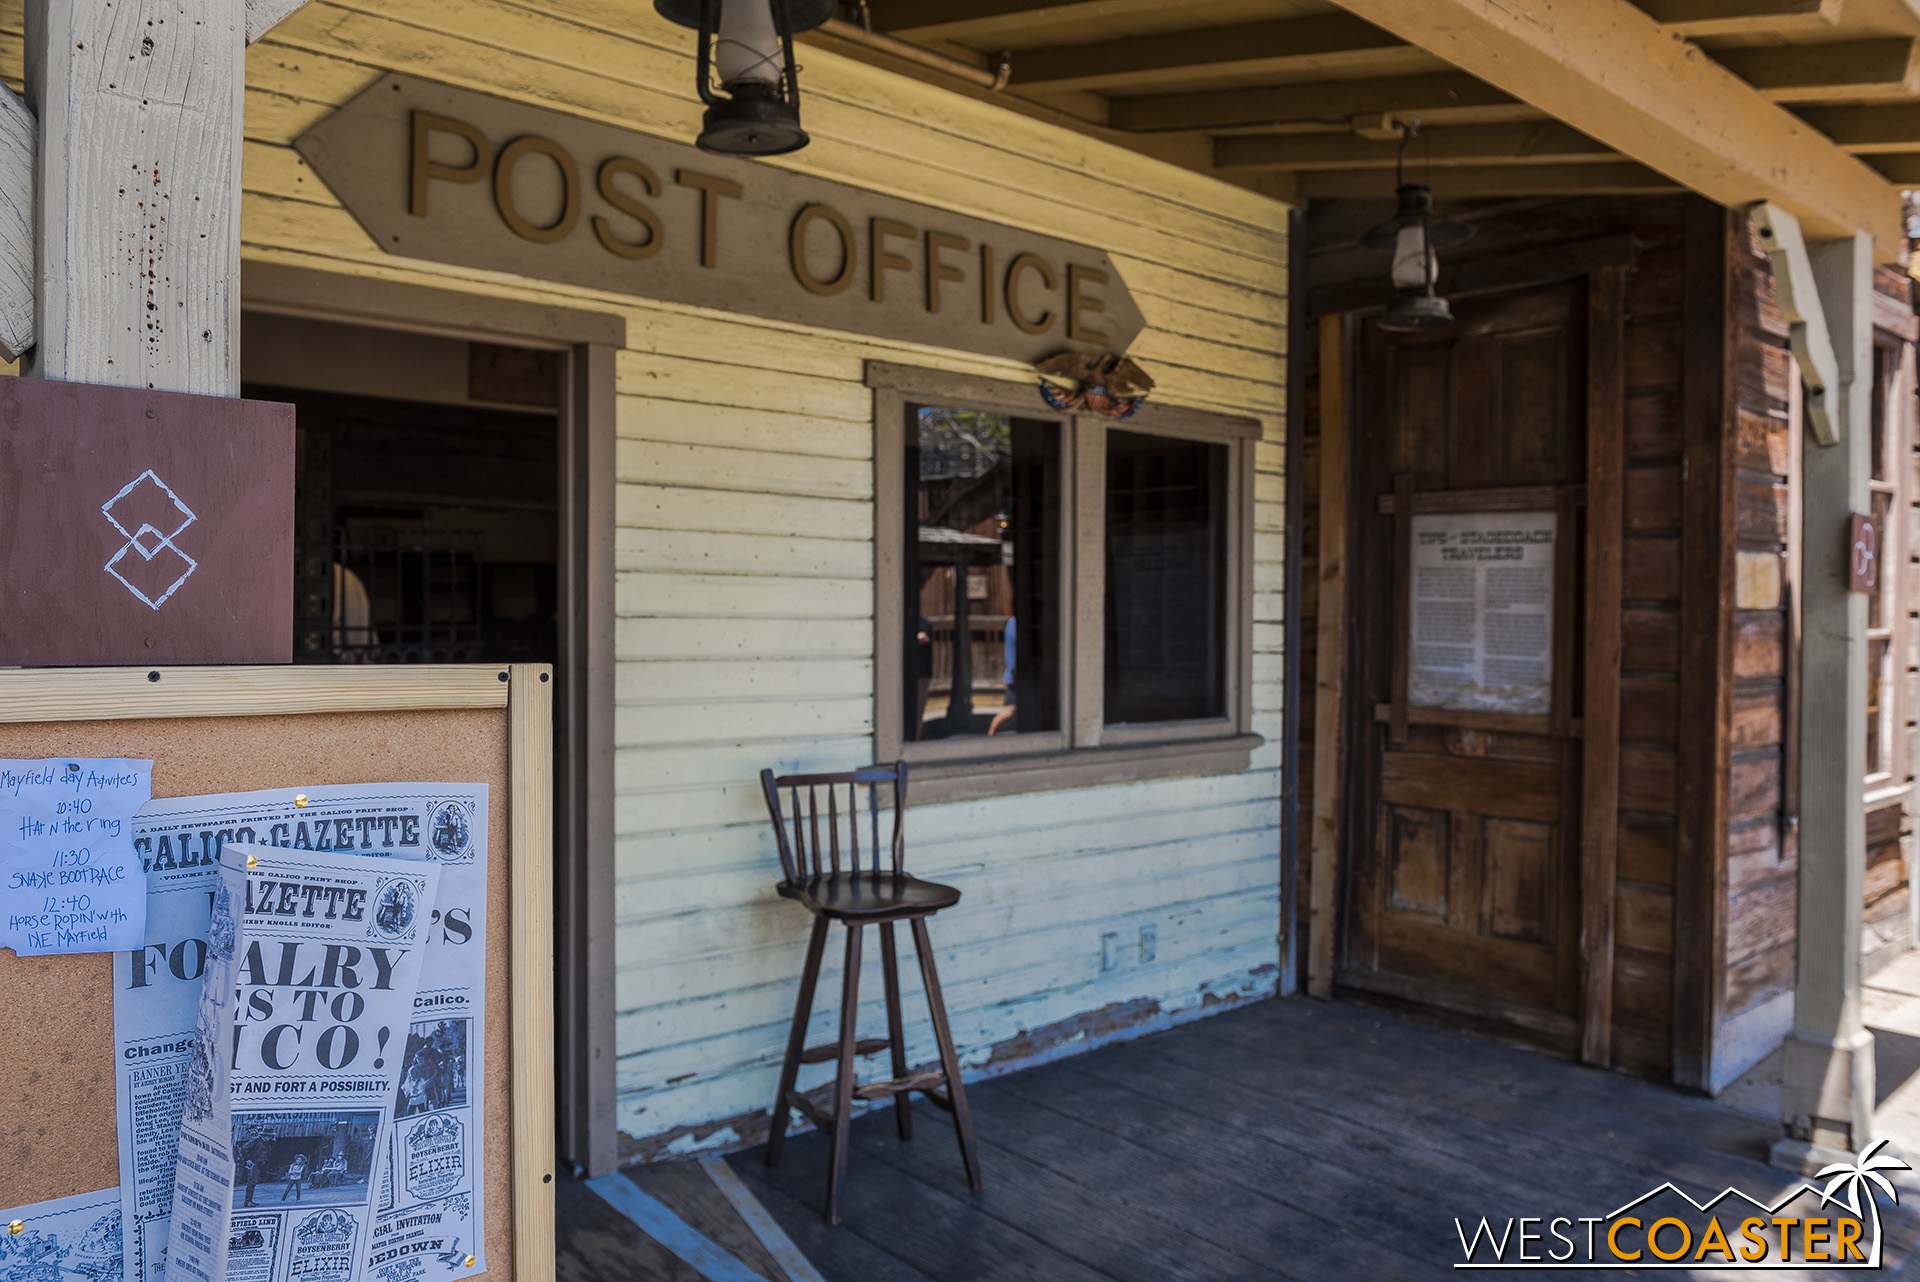  The Post Office is a popular hangout for local townspeople. 